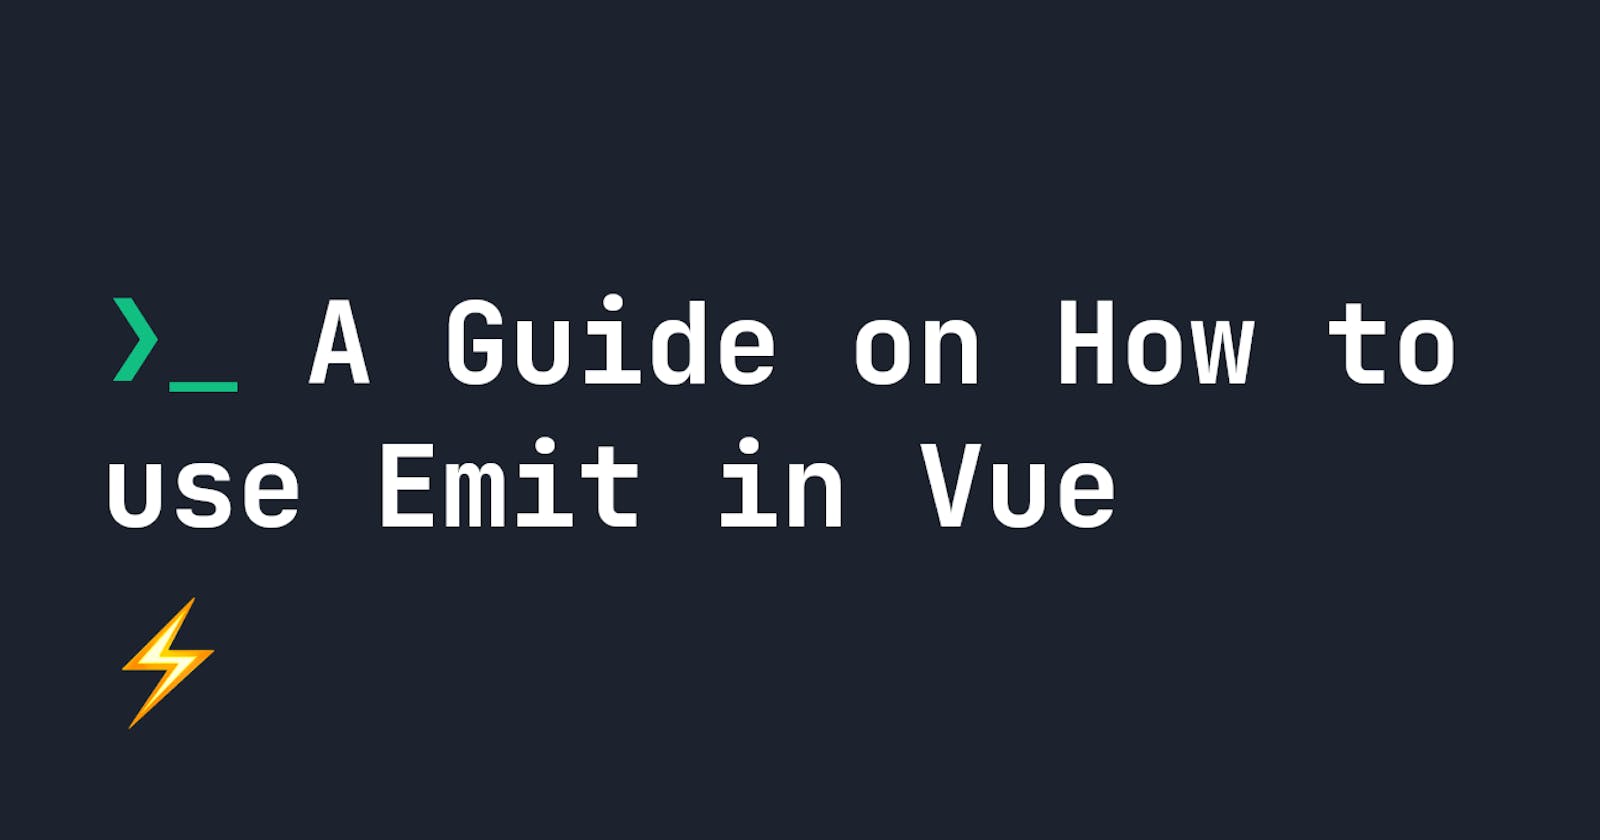 A Guide on How to use Emit in Vue